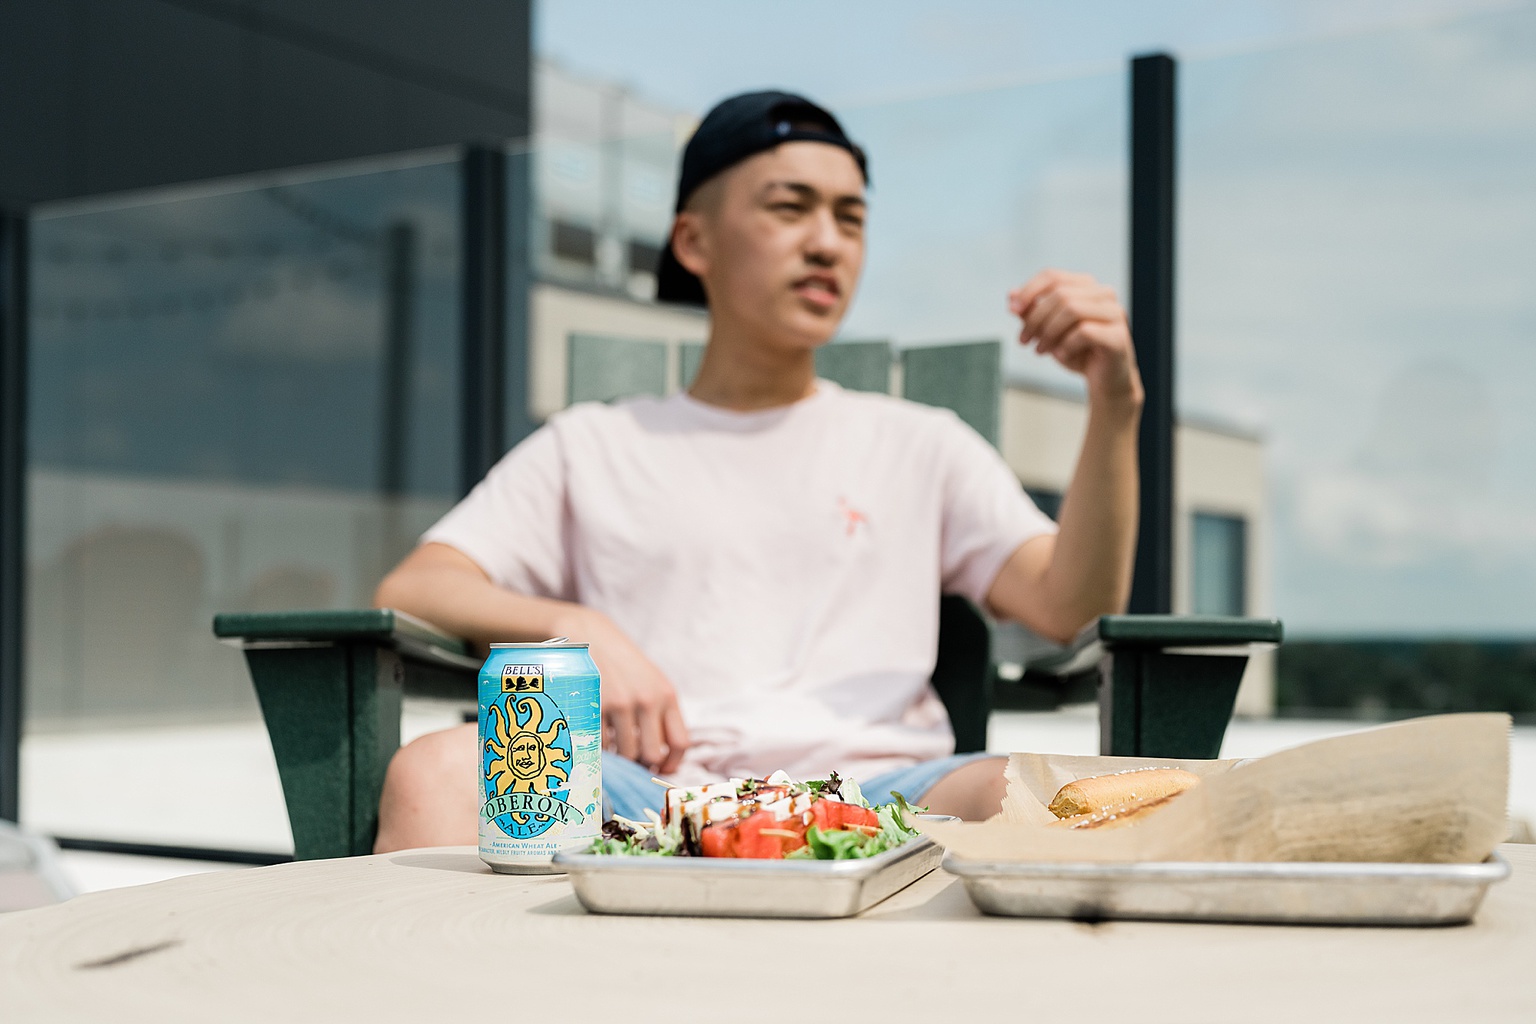 Graduate Rock bar commercial photography showing a student in the background with a can of Oberon and food in the foreground, by Allie Siarto & Co. Photography, Lansing, Michigan commercial photographers